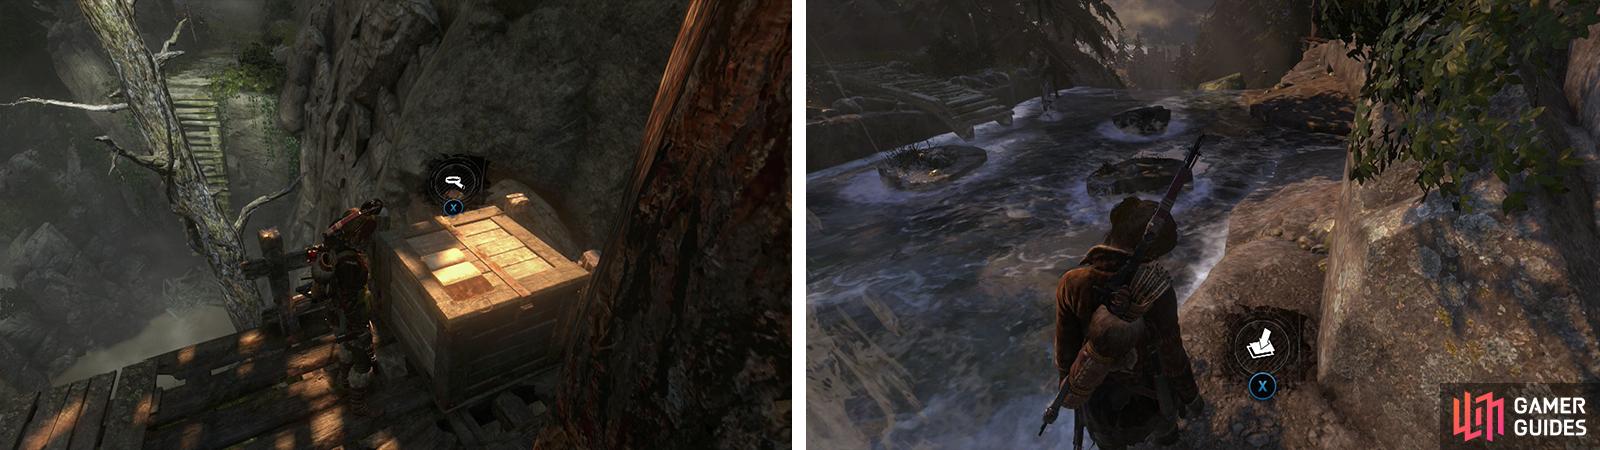 Before crossing the broken bridge, grapple axe up to the wooden platform for a Document 29 (left). Near the waterfall, youll find Survival Cache 17 (right).